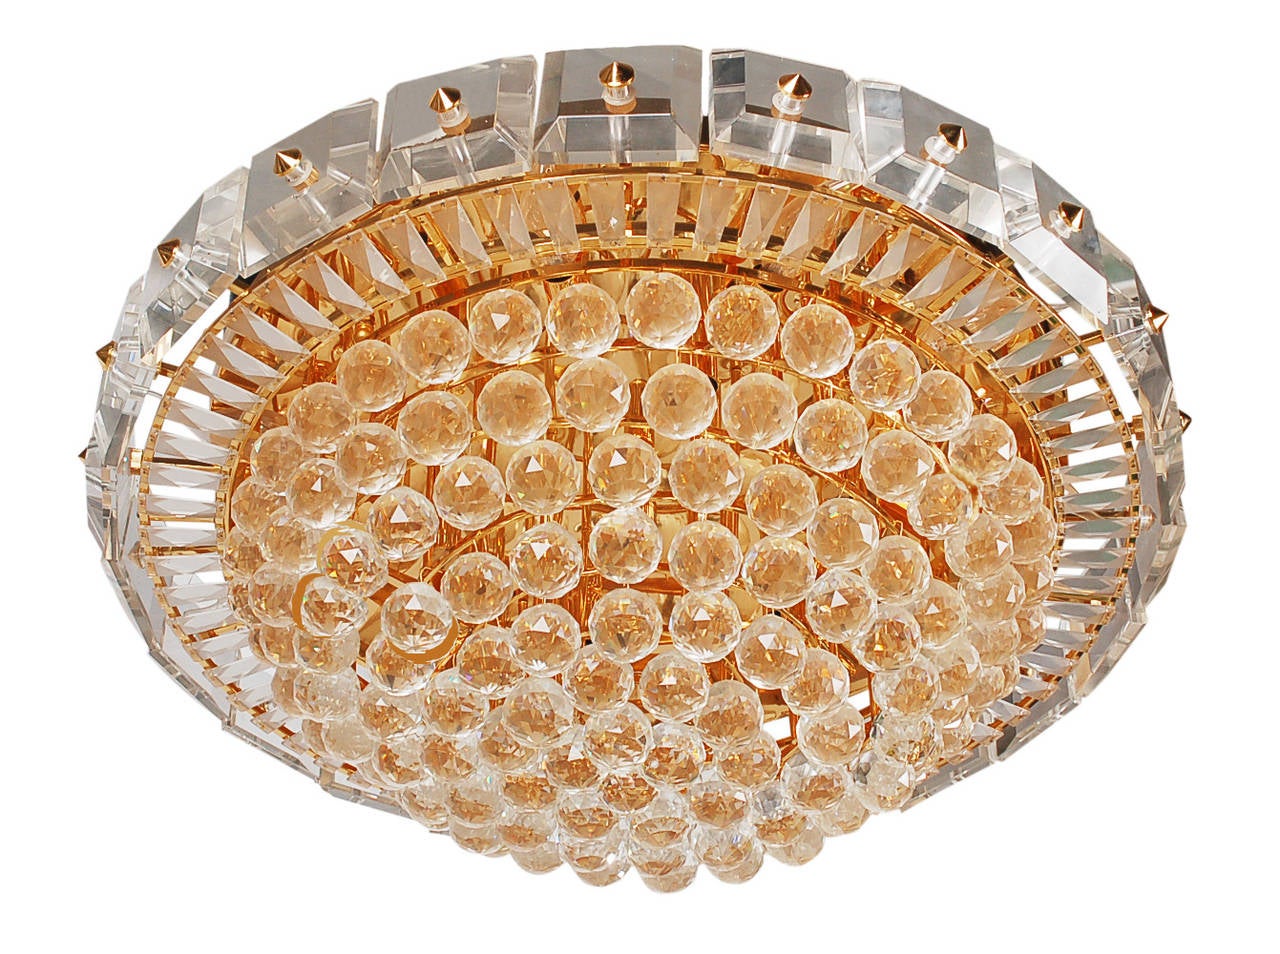 Large flush mount fixture embellished with crystals of three different shapes. The fixture takes 19 candelabra bulbs up to 40W each. Wired and in working condition.